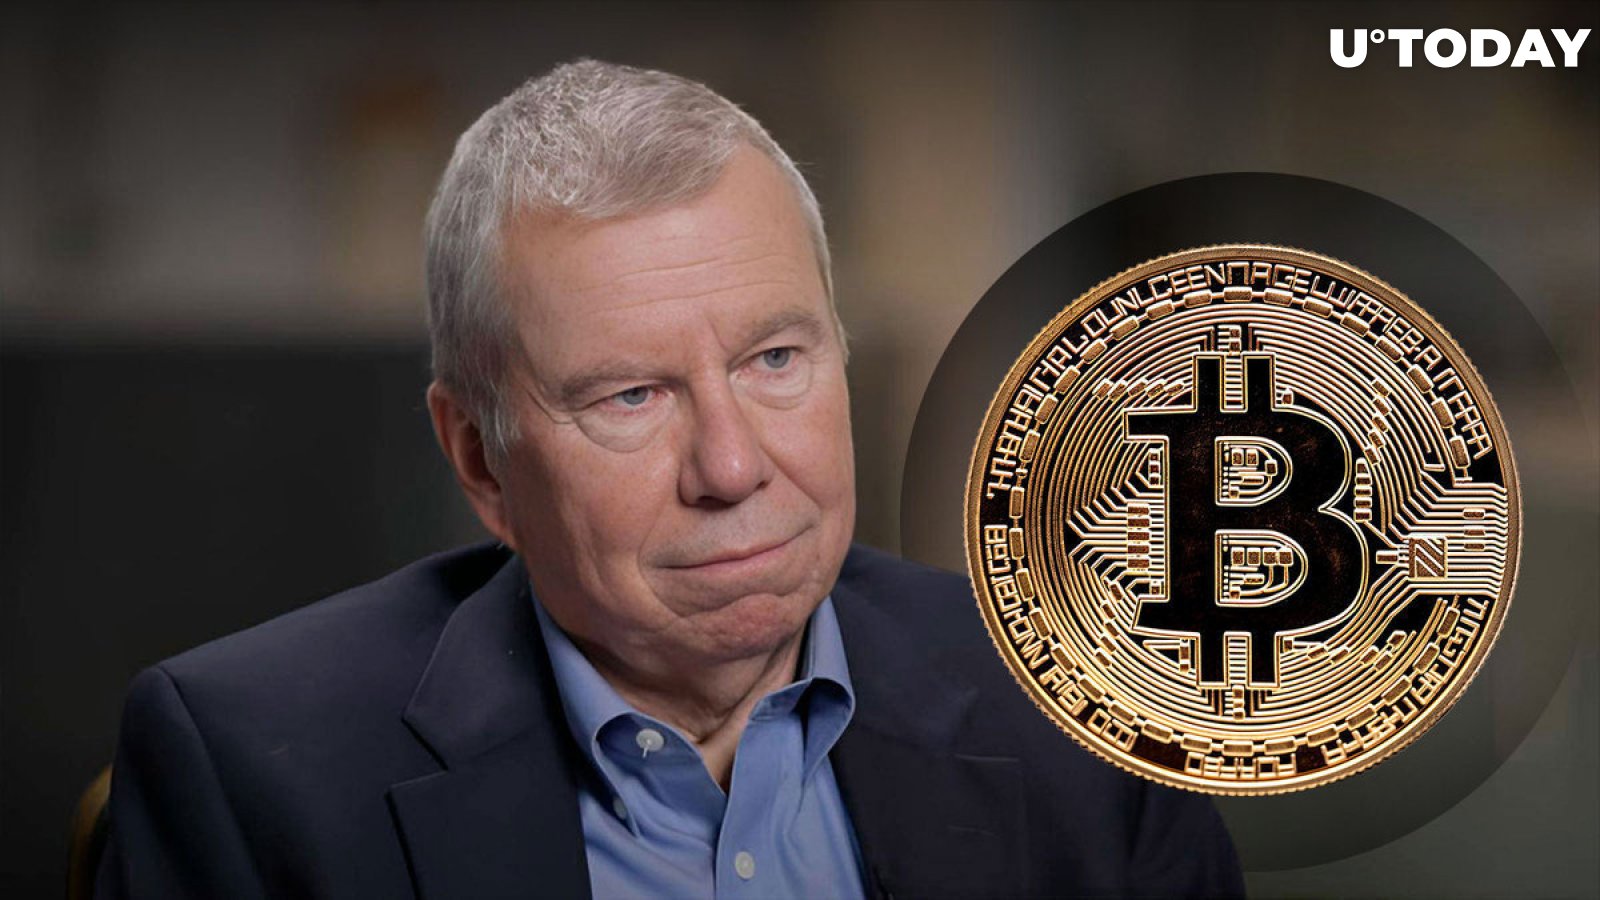 'There is no failed rally in Bitcoin (BTC)': says legendary trader John Bollinger